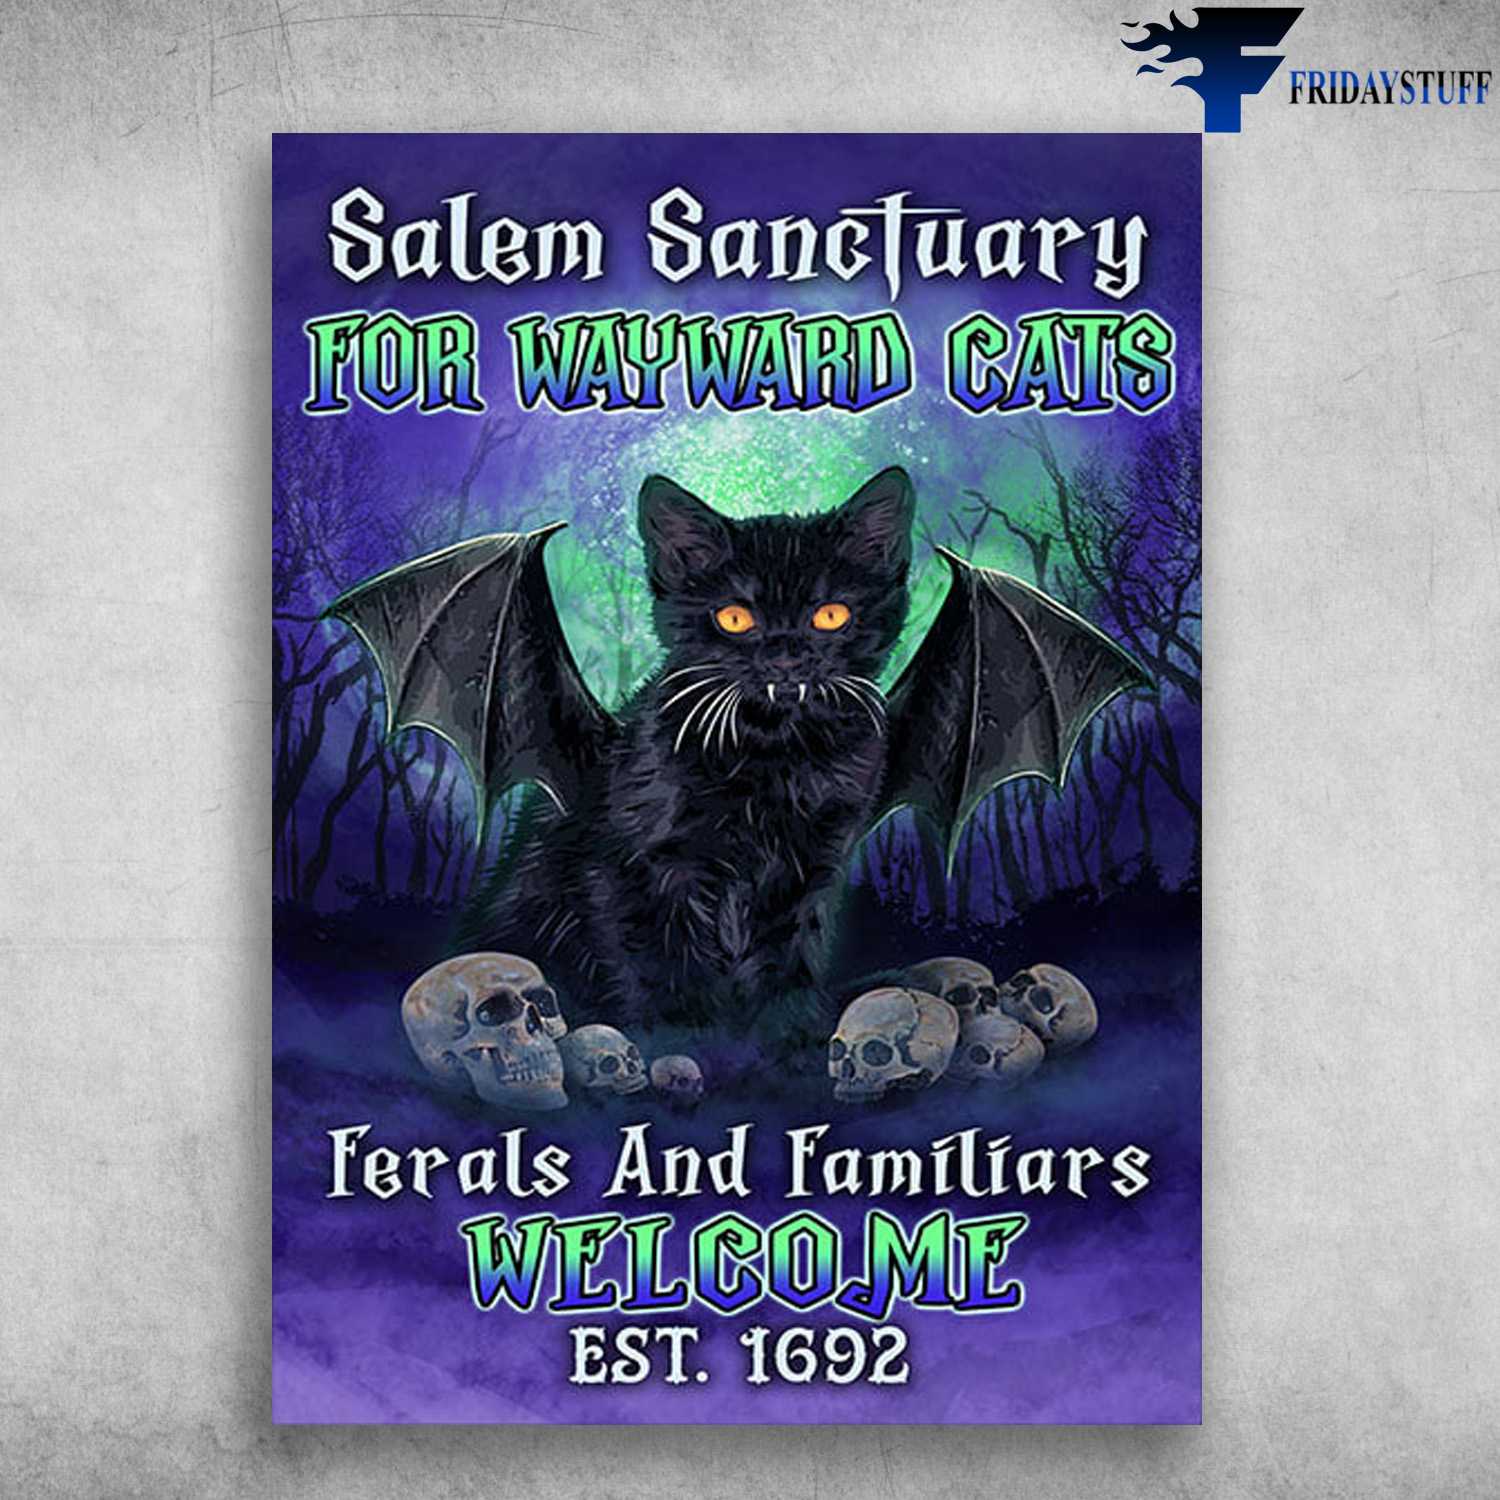 Black Cat Dracula - Salem Sanctuary, For Wayward Cars, Ferals And Familiars Welcome, Halloween Day